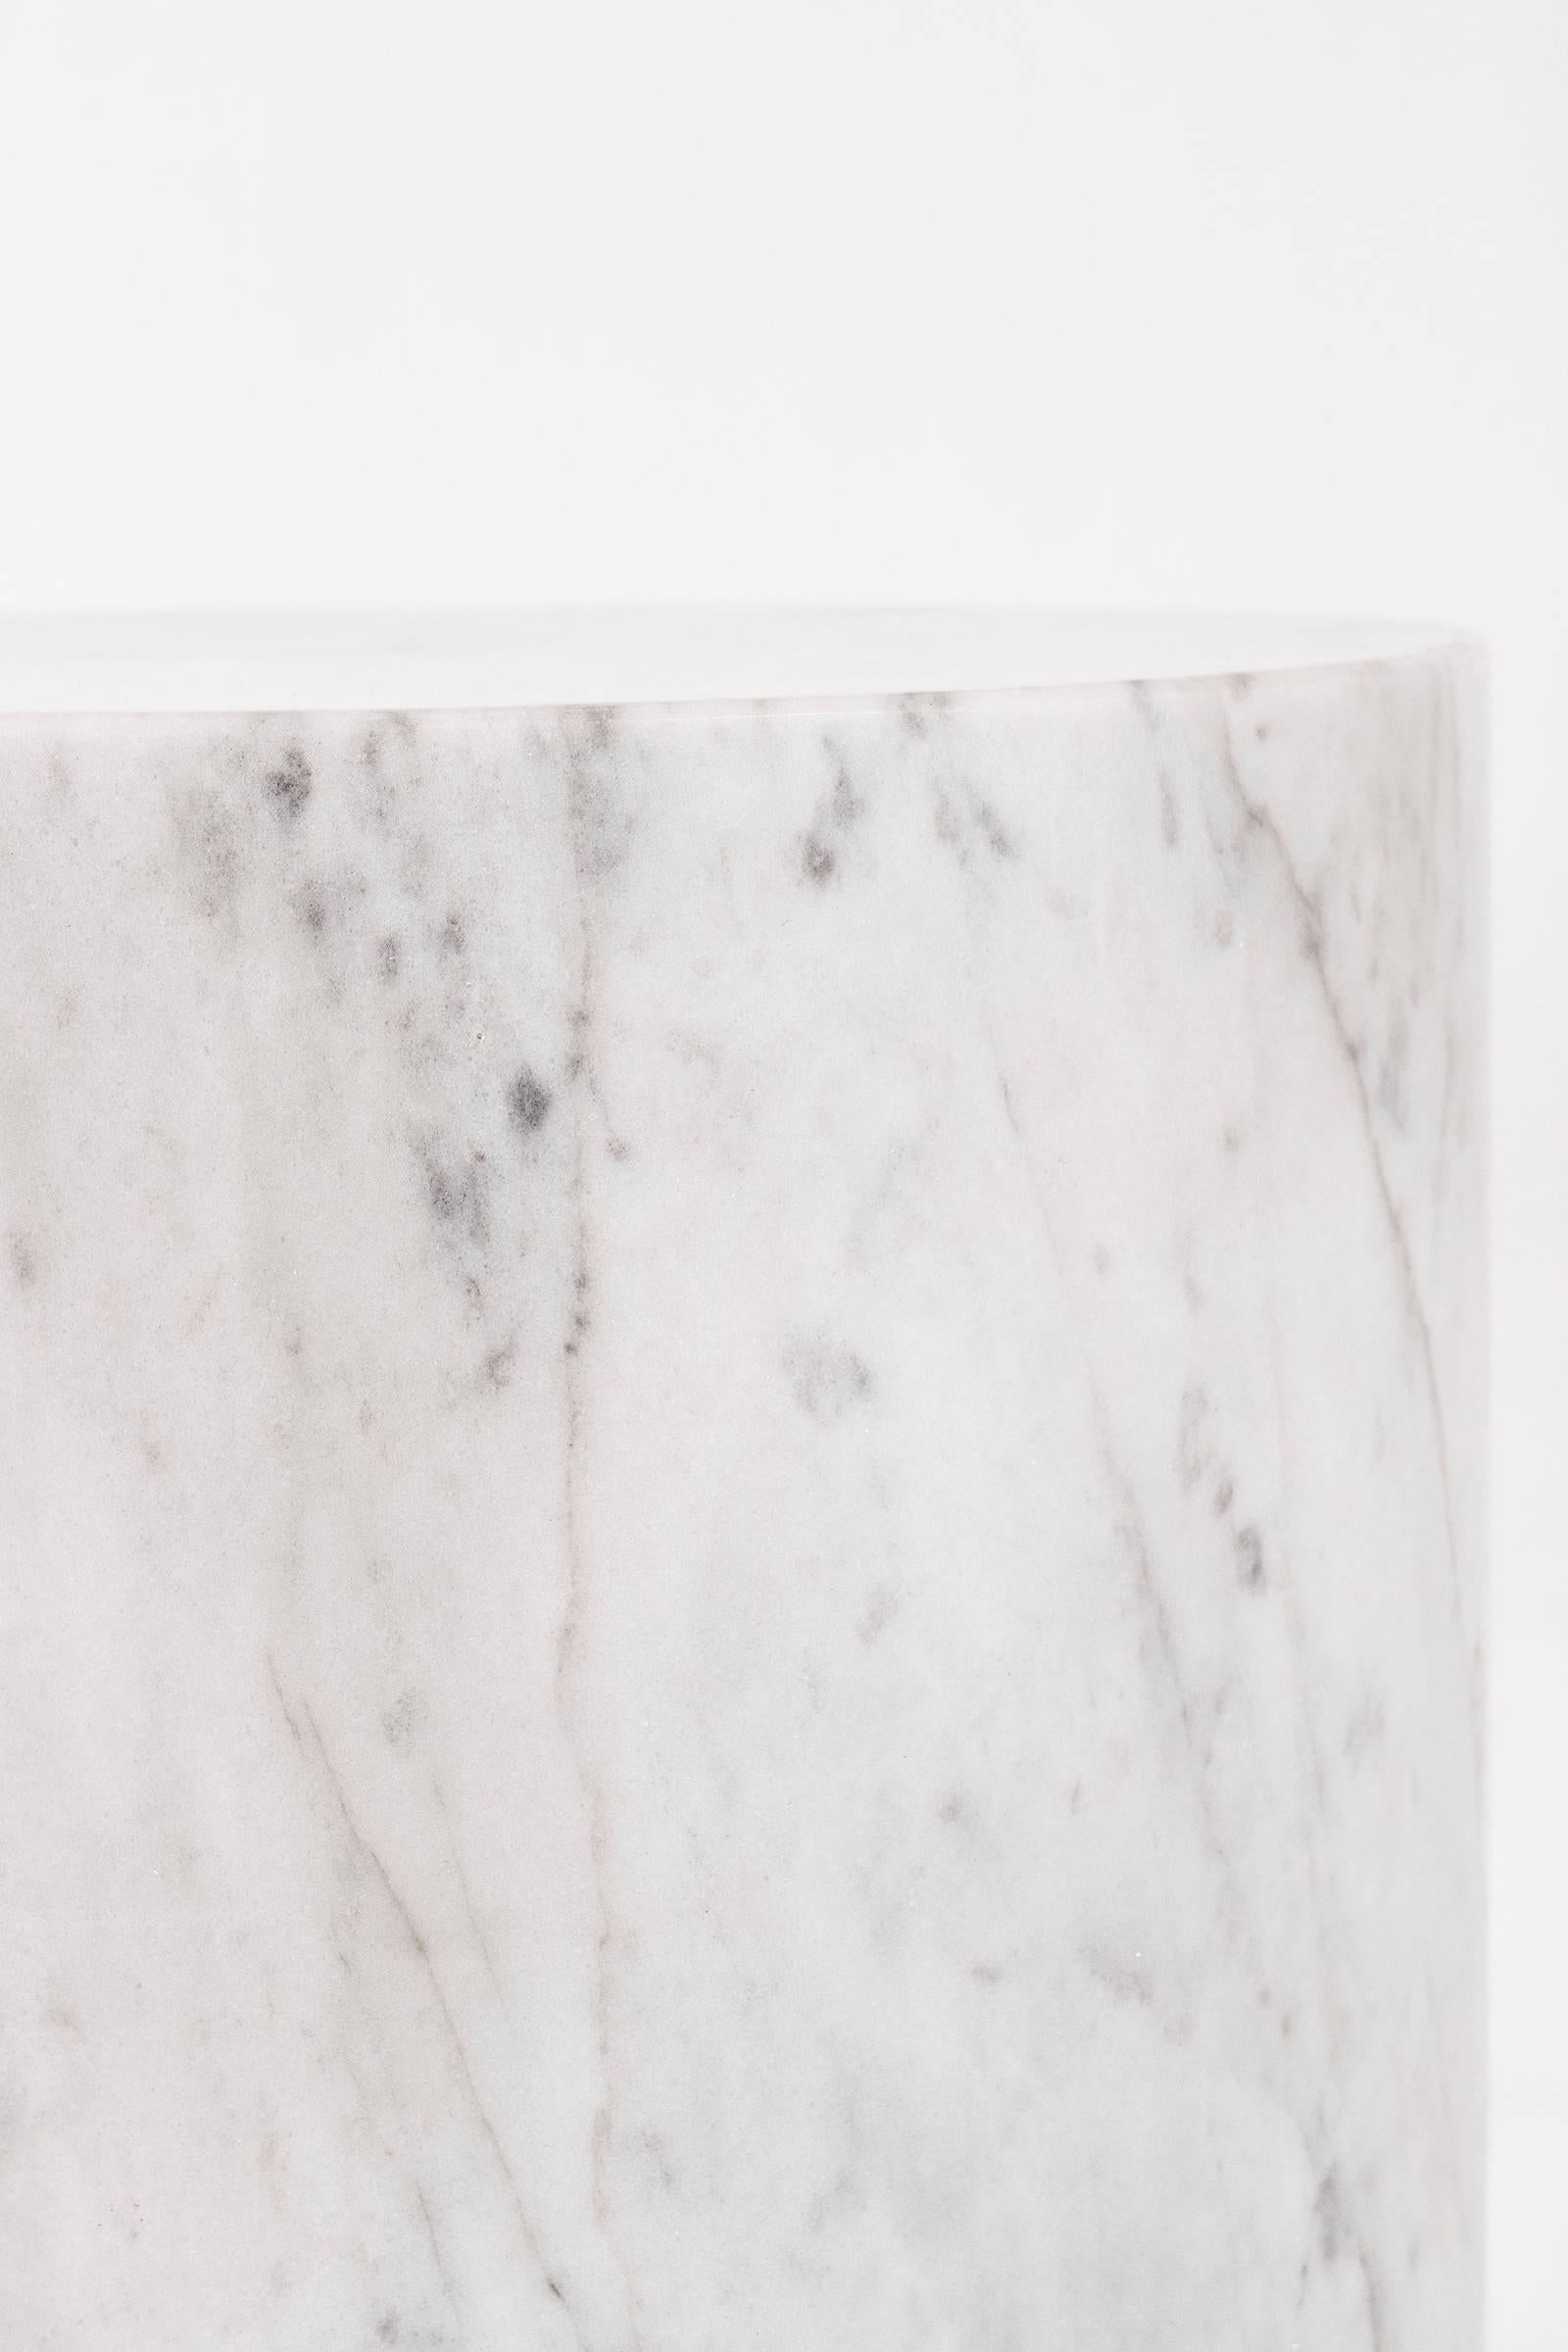 American Marble End Table in the Style of Lucia Mercer For Sale